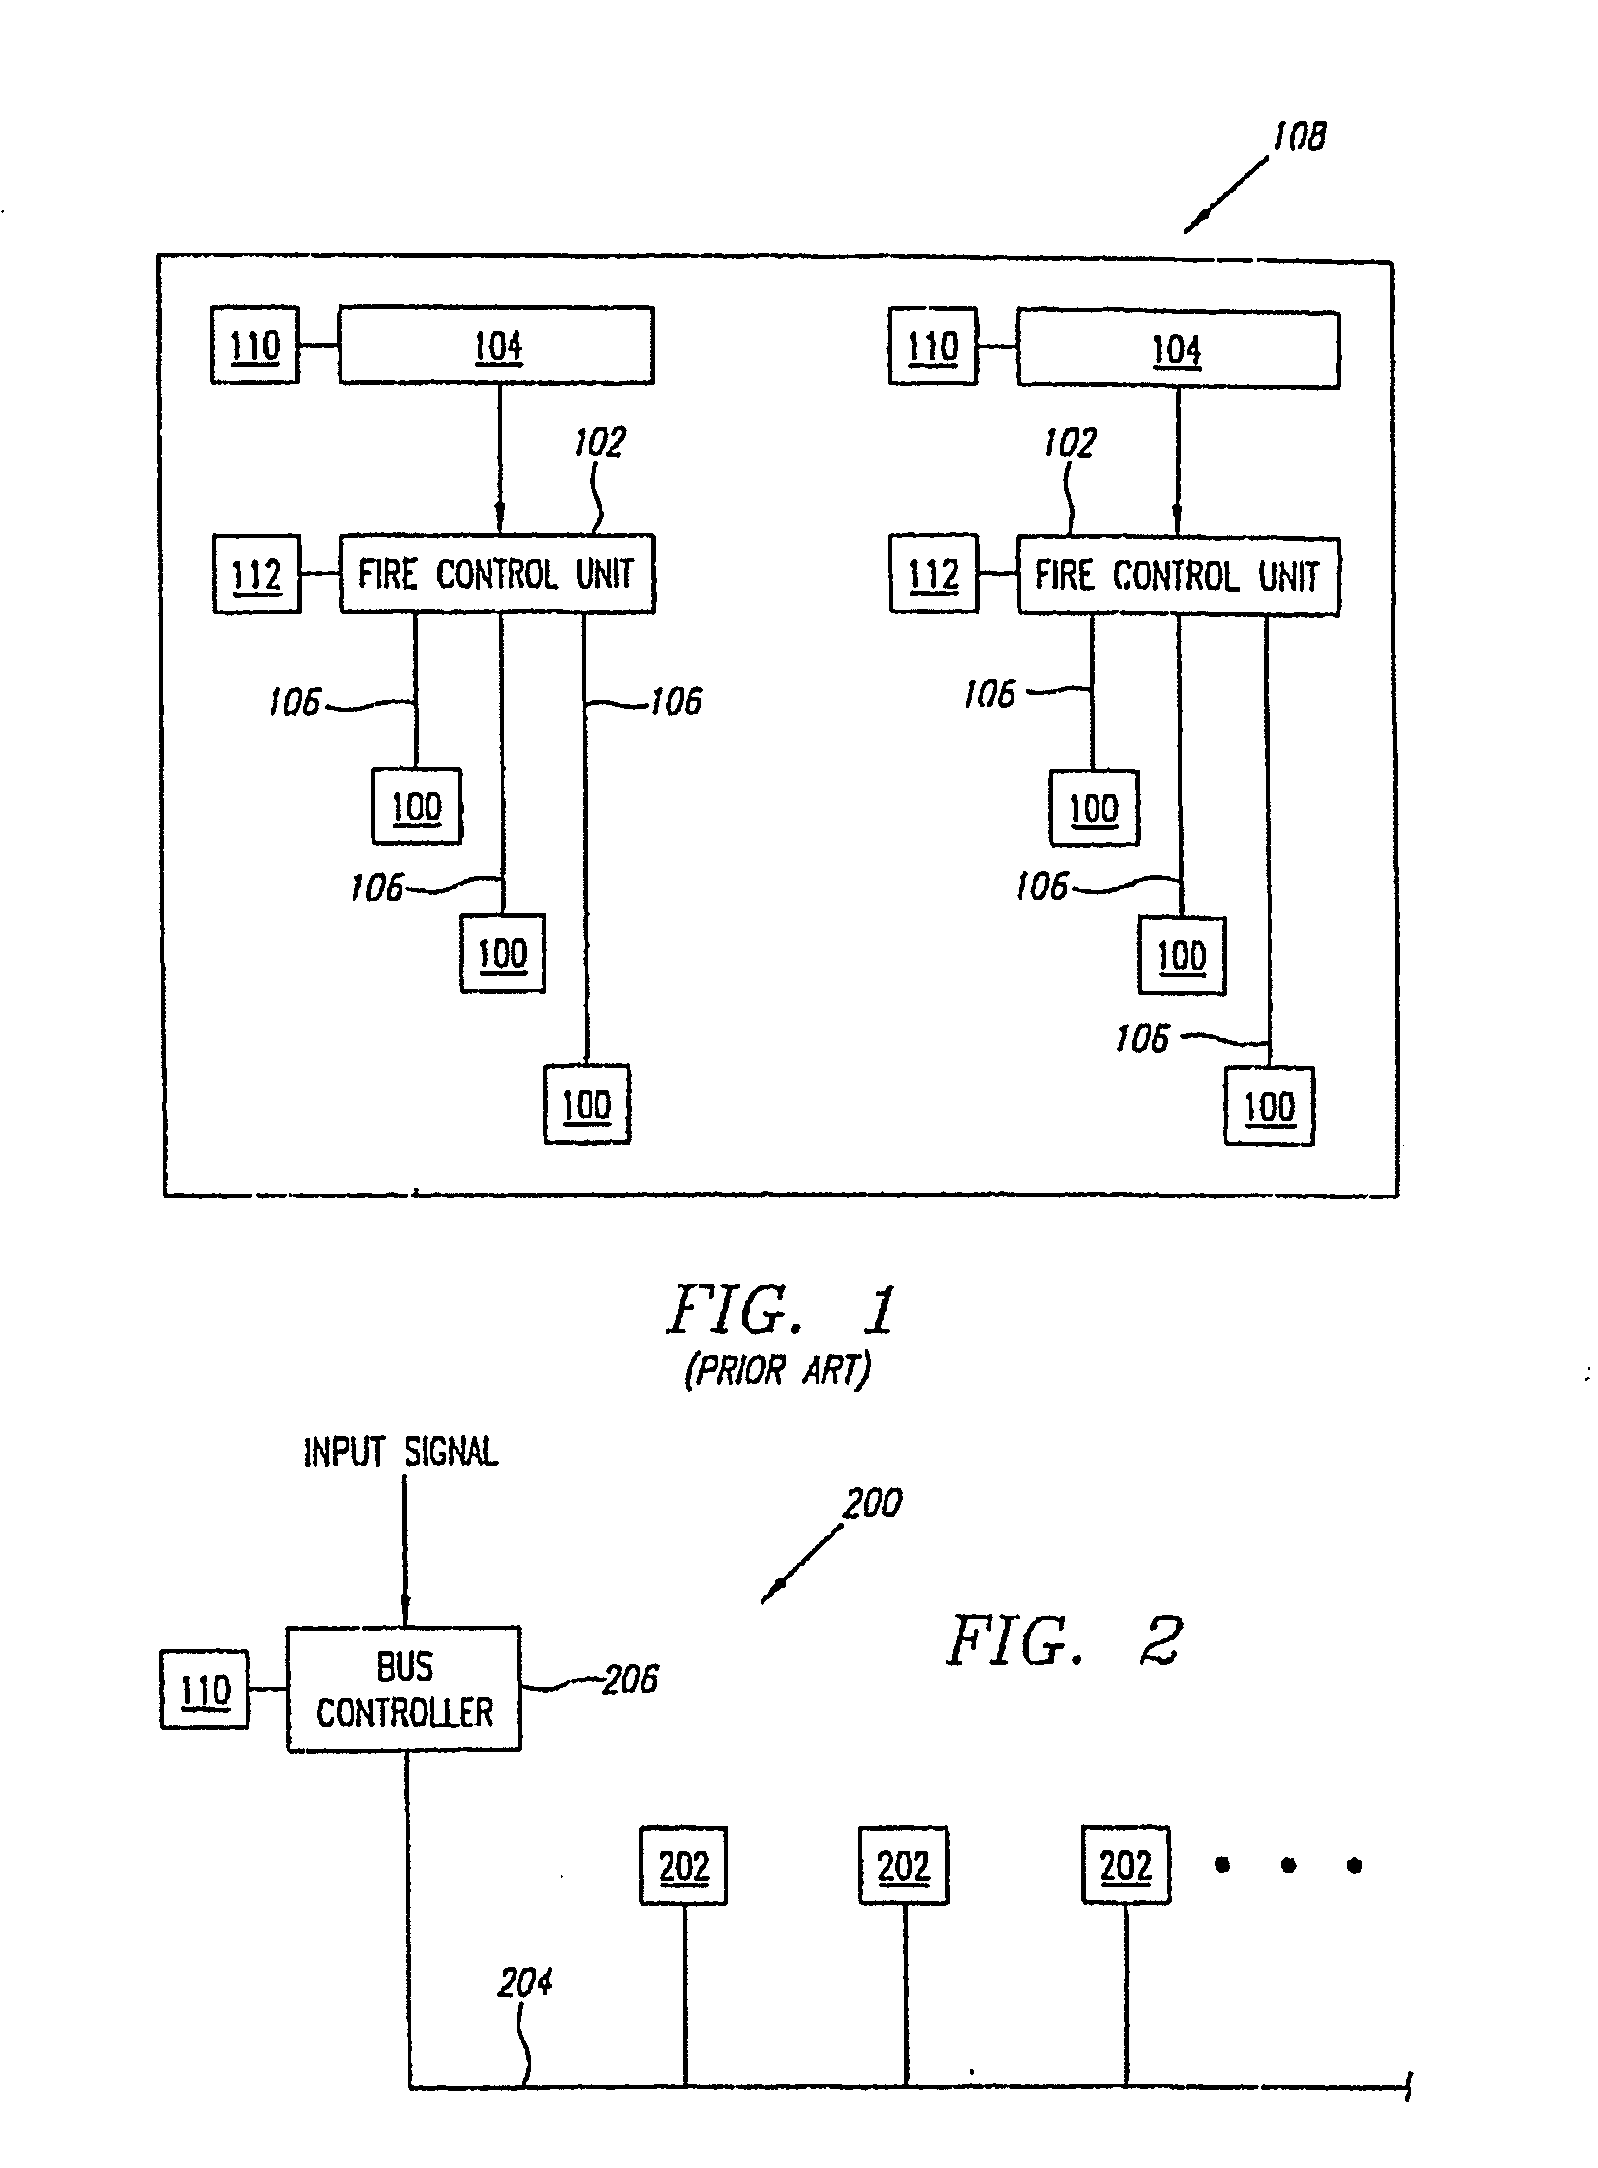 Networked electronic ordnance system